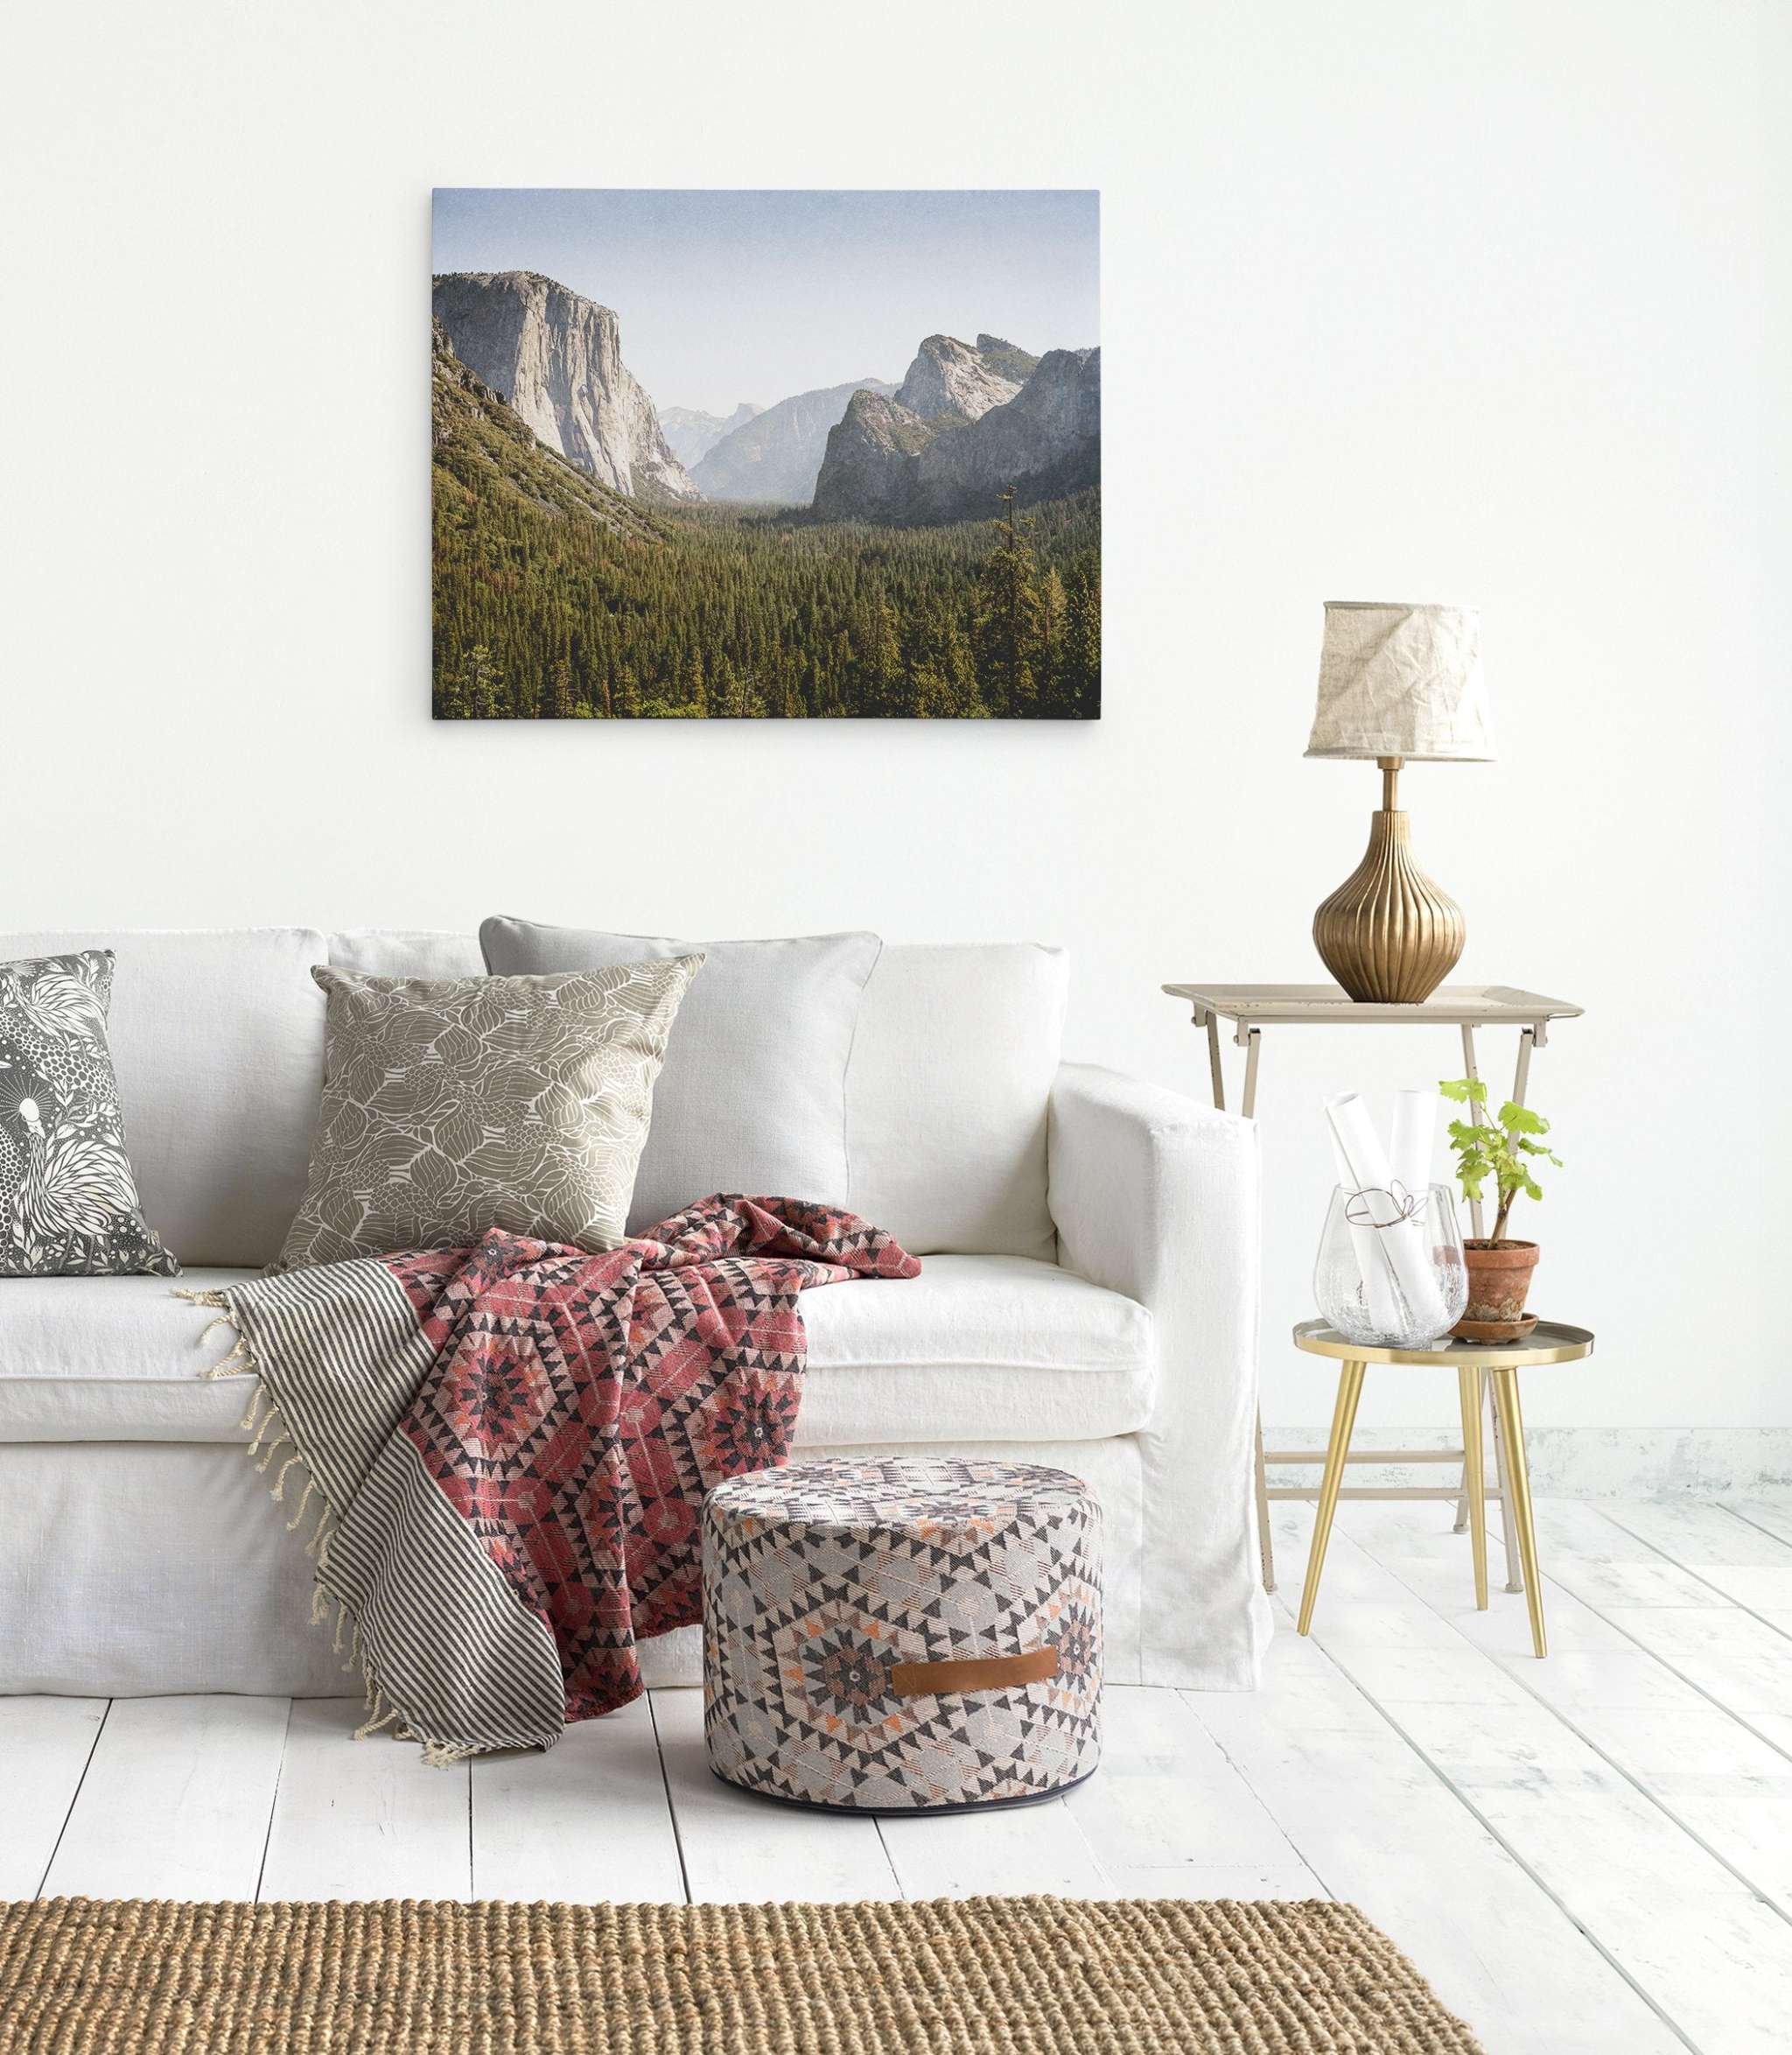 A modern living room features a white sofa with assorted patterned cushions and a red patterned throw blanket. A small table with a gold lamp and plant is adjacent. A round patterned pouf sits nearby, and Offley Green's 'Yosemite Valley' Northern California Canvas Wall Art printed on premium artist-grade canvas hangs on the wall.